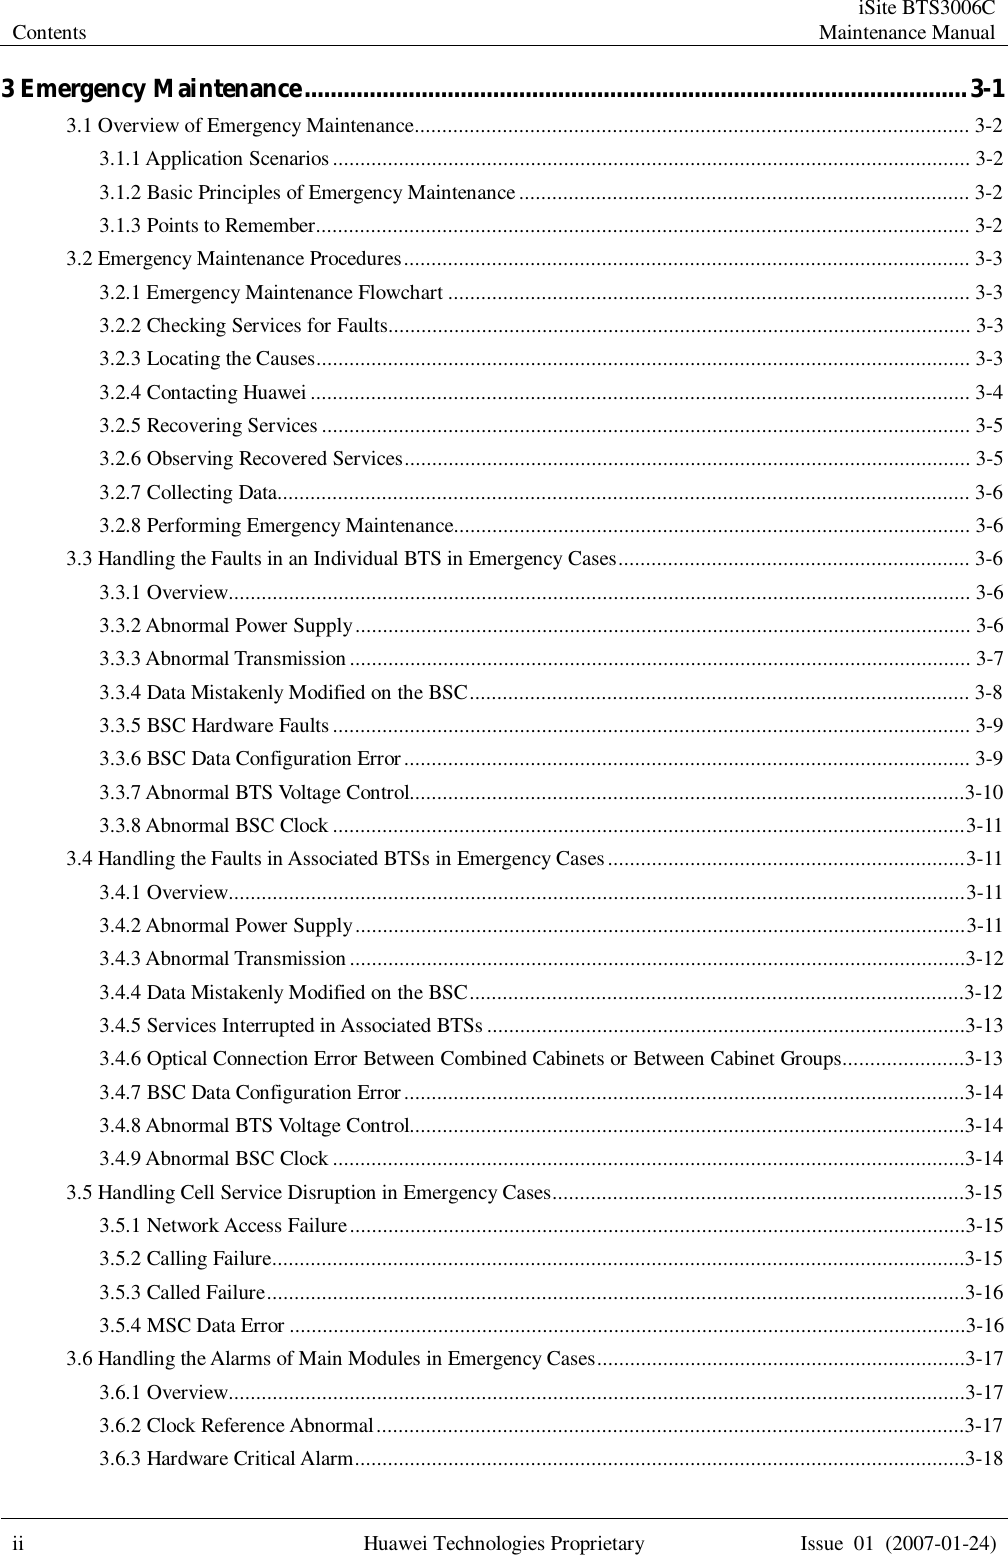 Contents  iSite BTS3006C Maintenance Manual  ii Huawei Technologies Proprietary Issue 01 (2007-01-24)  3 Emergency Maintenance......................................................................................................3-1 3.1 Overview of Emergency Maintenance.....................................................................................................3-2 3.1.1 Application Scenarios....................................................................................................................3-2 3.1.2 Basic Principles of Emergency Maintenance..................................................................................3-2 3.1.3 Points to Remember.......................................................................................................................3-2 3.2 Emergency Maintenance Procedures.......................................................................................................3-3 3.2.1 Emergency Maintenance Flowchart...............................................................................................3-3 3.2.2 Checking Services for Faults..........................................................................................................3-3 3.2.3 Locating the Causes.......................................................................................................................3-3 3.2.4 Contacting Huawei........................................................................................................................3-4 3.2.5 Recovering Services......................................................................................................................3-5 3.2.6 Observing Recovered Services.......................................................................................................3-5 3.2.7 Collecting Data..............................................................................................................................3-6 3.2.8 Performing Emergency Maintenance..............................................................................................3-6 3.3 Handling the Faults in an Individual BTS in Emergency Cases................................................................3-6 3.3.1 Overview.......................................................................................................................................3-6 3.3.2 Abnormal Power Supply................................................................................................................3-6 3.3.3 Abnormal Transmission.................................................................................................................3-7 3.3.4 Data Mistakenly Modified on the BSC...........................................................................................3-8 3.3.5 BSC Hardware Faults....................................................................................................................3-9 3.3.6 BSC Data Configuration Error.......................................................................................................3-9 3.3.7 Abnormal BTS Voltage Control.....................................................................................................3-10 3.3.8 Abnormal BSC Clock...................................................................................................................3-11 3.4 Handling the Faults in Associated BTSs in Emergency Cases.................................................................3-11 3.4.1 Overview......................................................................................................................................3-11 3.4.2 Abnormal Power Supply...............................................................................................................3-11 3.4.3 Abnormal Transmission................................................................................................................3-12 3.4.4 Data Mistakenly Modified on the BSC..........................................................................................3-12 3.4.5 Services Interrupted in Associated BTSs.......................................................................................3-13 3.4.6 Optical Connection Error Between Combined Cabinets or Between Cabinet Groups......................3-13 3.4.7 BSC Data Configuration Error......................................................................................................3-14 3.4.8 Abnormal BTS Voltage Control.....................................................................................................3-14 3.4.9 Abnormal BSC Clock...................................................................................................................3-14 3.5 Handling Cell Service Disruption in Emergency Cases...........................................................................3-15 3.5.1 Network Access Failure................................................................................................................3-15 3.5.2 Calling Failure..............................................................................................................................3-15 3.5.3 Called Failure...............................................................................................................................3-16 3.5.4 MSC Data Error...........................................................................................................................3-16 3.6 Handling the Alarms of Main Modules in Emergency Cases...................................................................3-17 3.6.1 Overview......................................................................................................................................3-17 3.6.2 Clock Reference Abnormal...........................................................................................................3-17 3.6.3 Hardware Critical Alarm...............................................................................................................3-18 